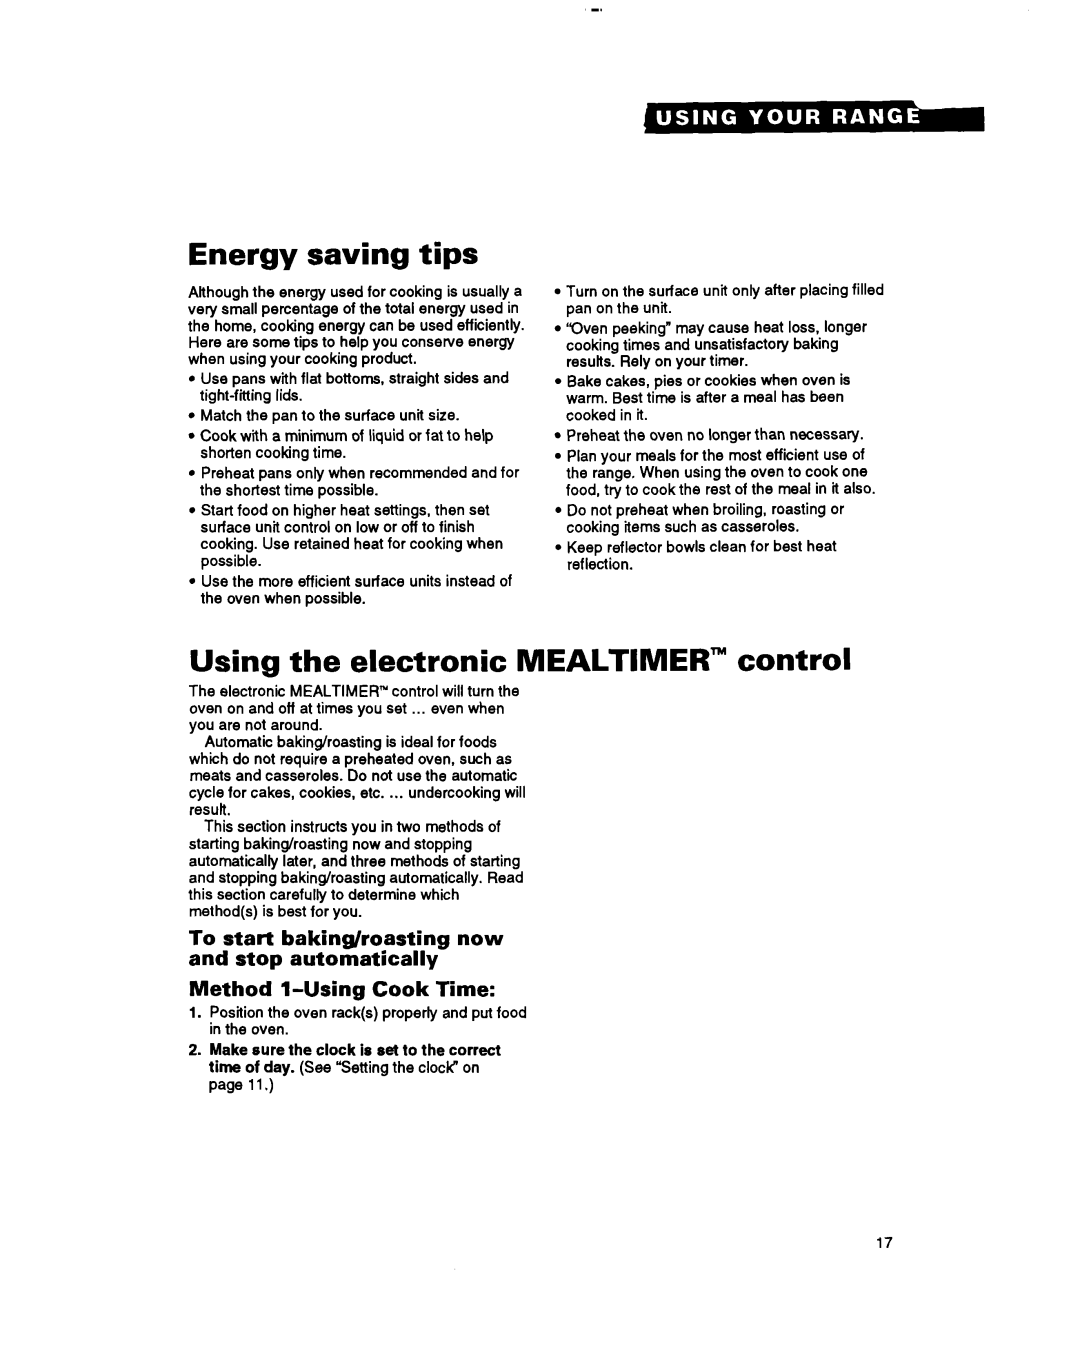 Whirlpool RF385PXY manual Energy saving tips, Using the electronic MEALTIMER” control, Method l-UsingCook Time 